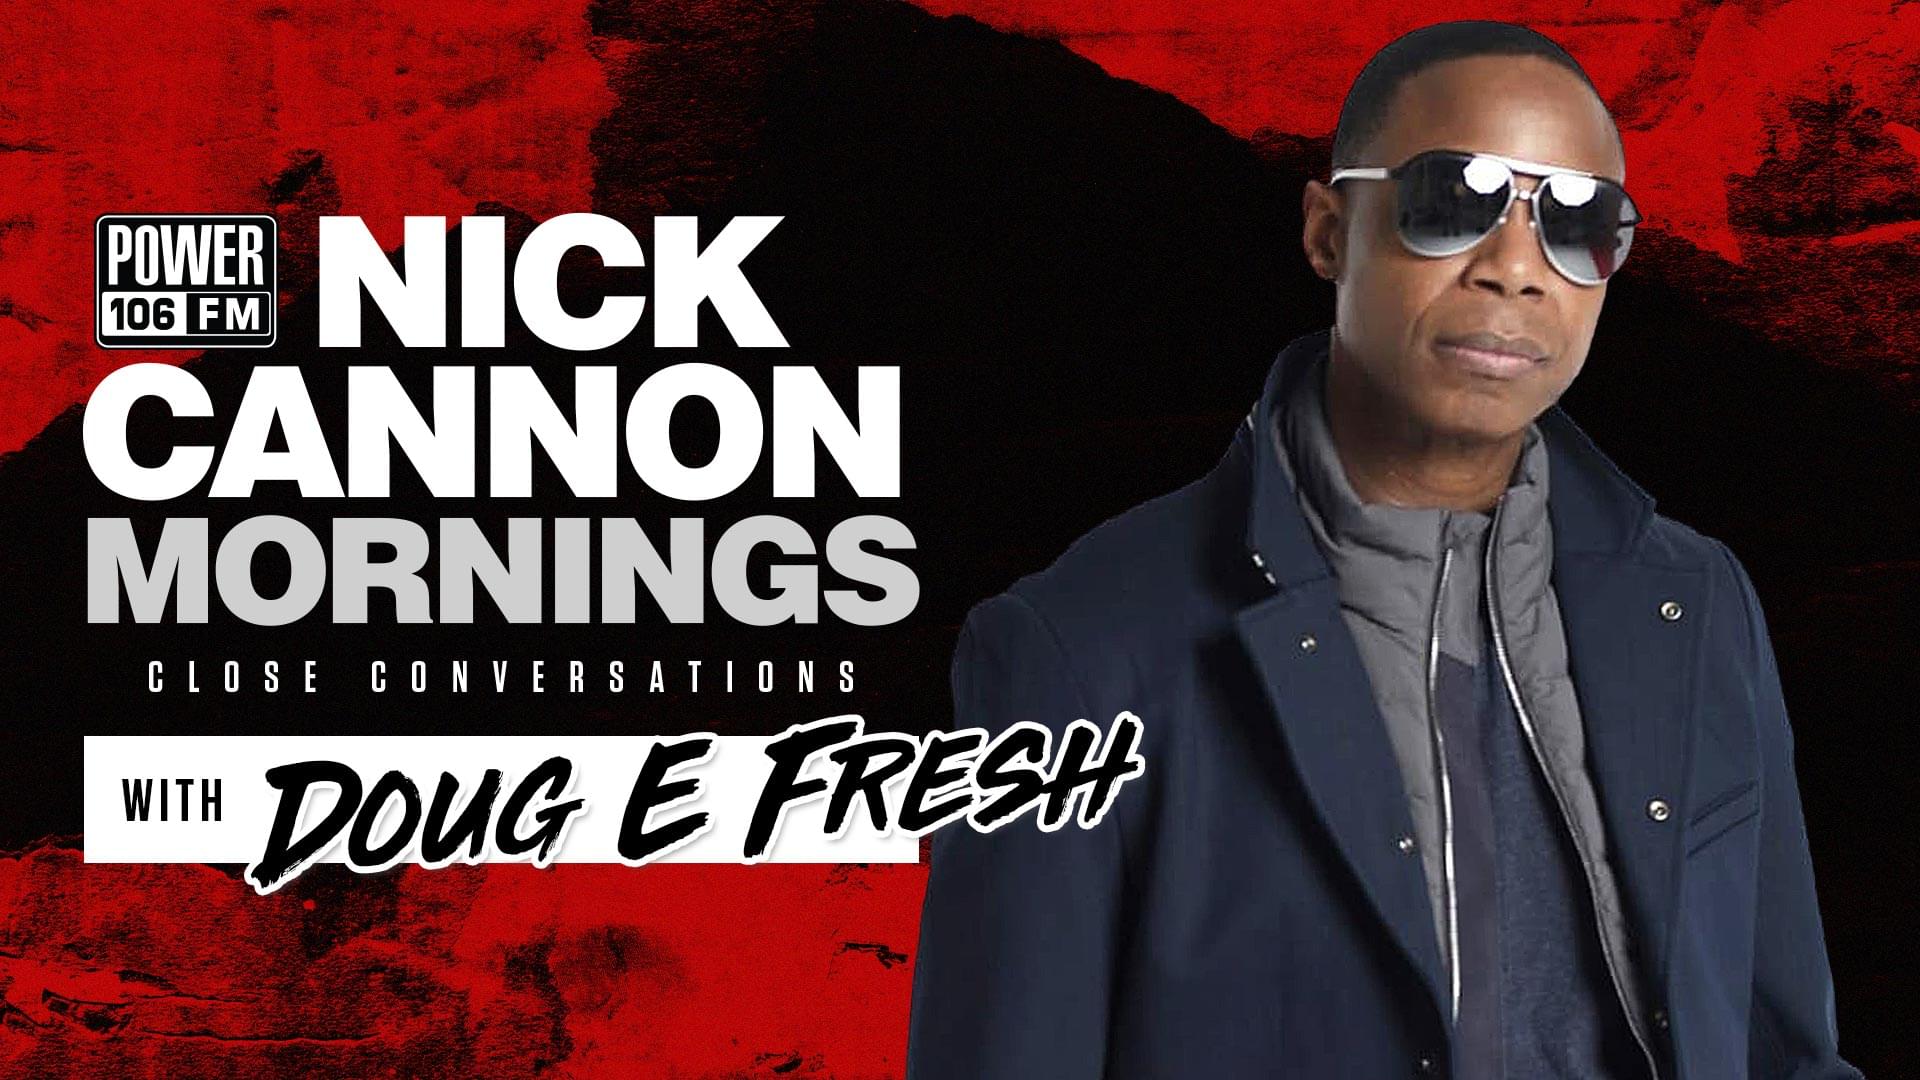 Doug E Fresh On The Lost Definition of An MC, The “I Can’t Breathe” Campaign, His New Documentary + More